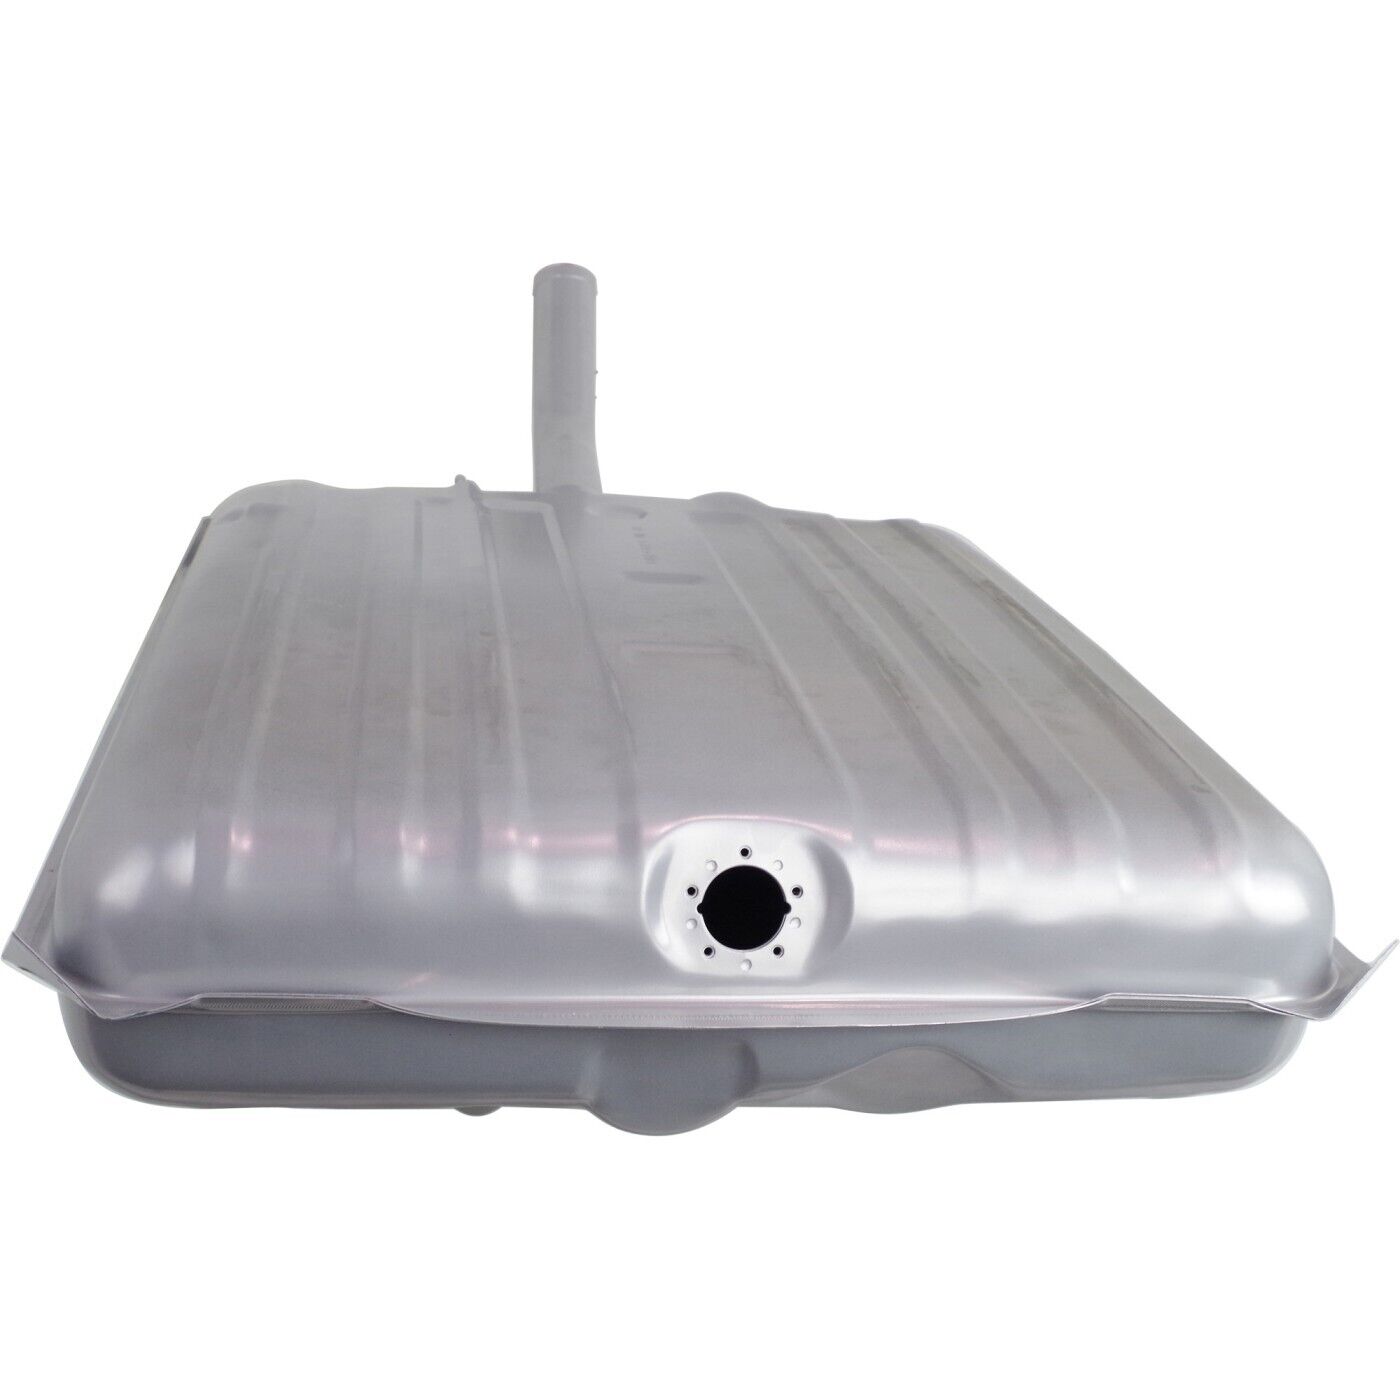 16 Gallon Gas Fuel Tank w/ Filler Neck for 59-60 Impala Bel-Air Biscayne